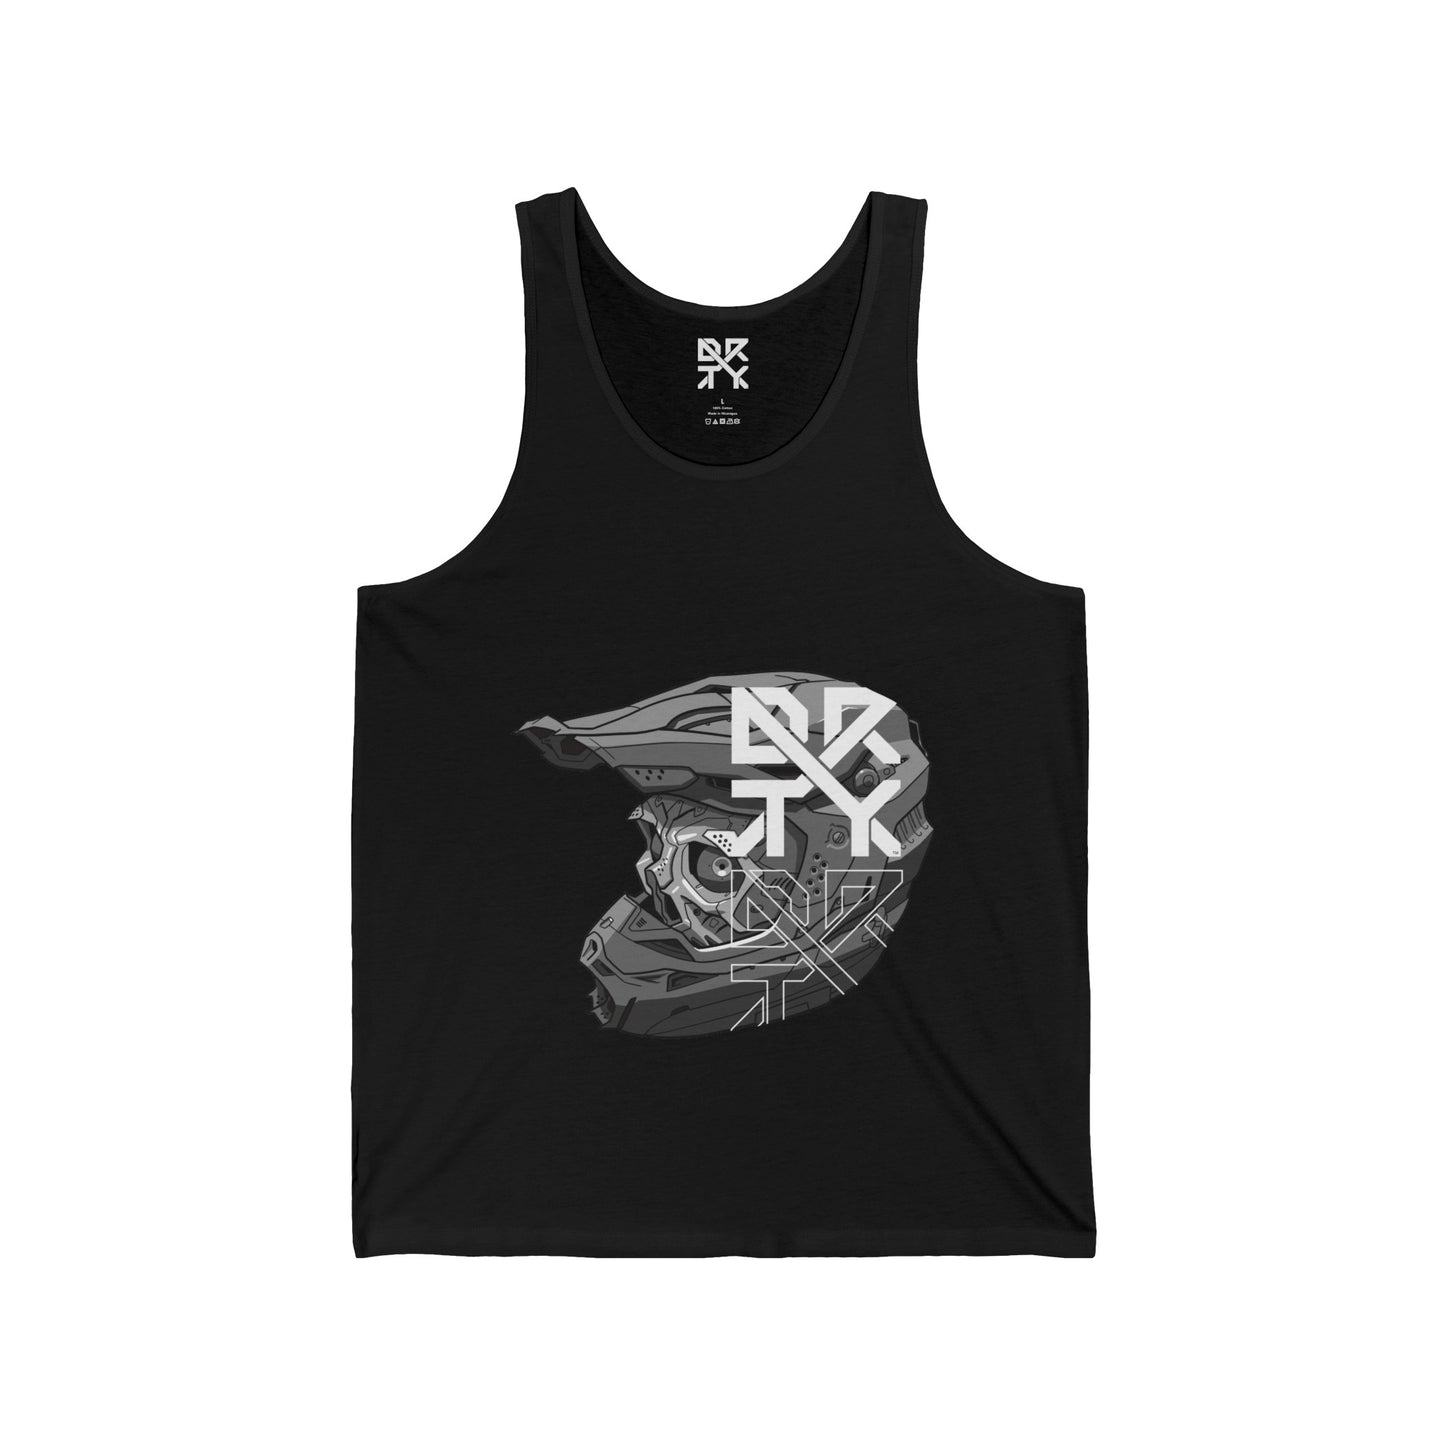 This image showcases the front view of a tank top with a cyber skull inside of a motocross helmet with a DRTY X logo on the helmet.